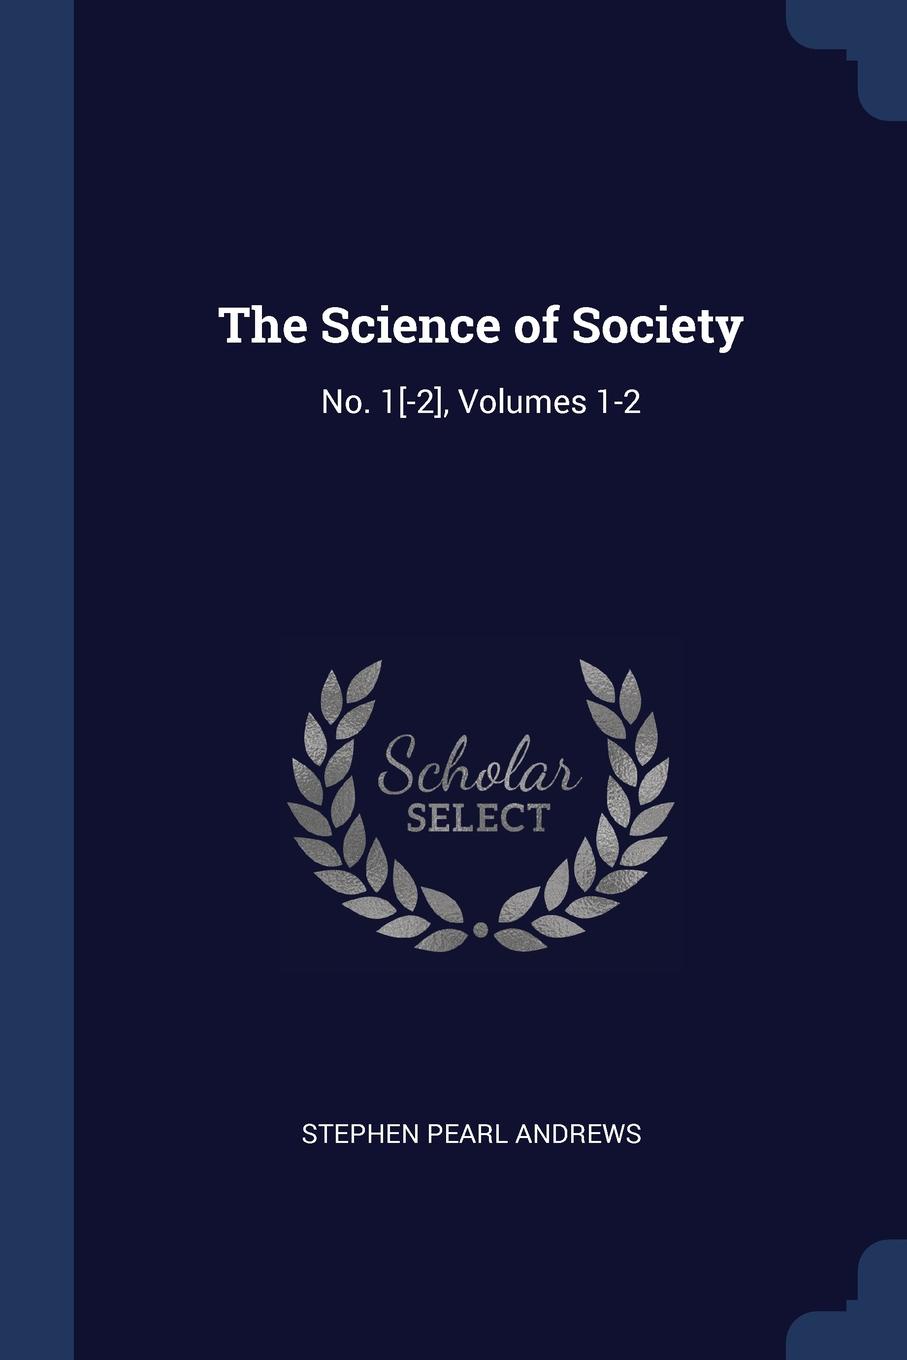 The Science of Society. No. 1.-2., Volumes 1-2